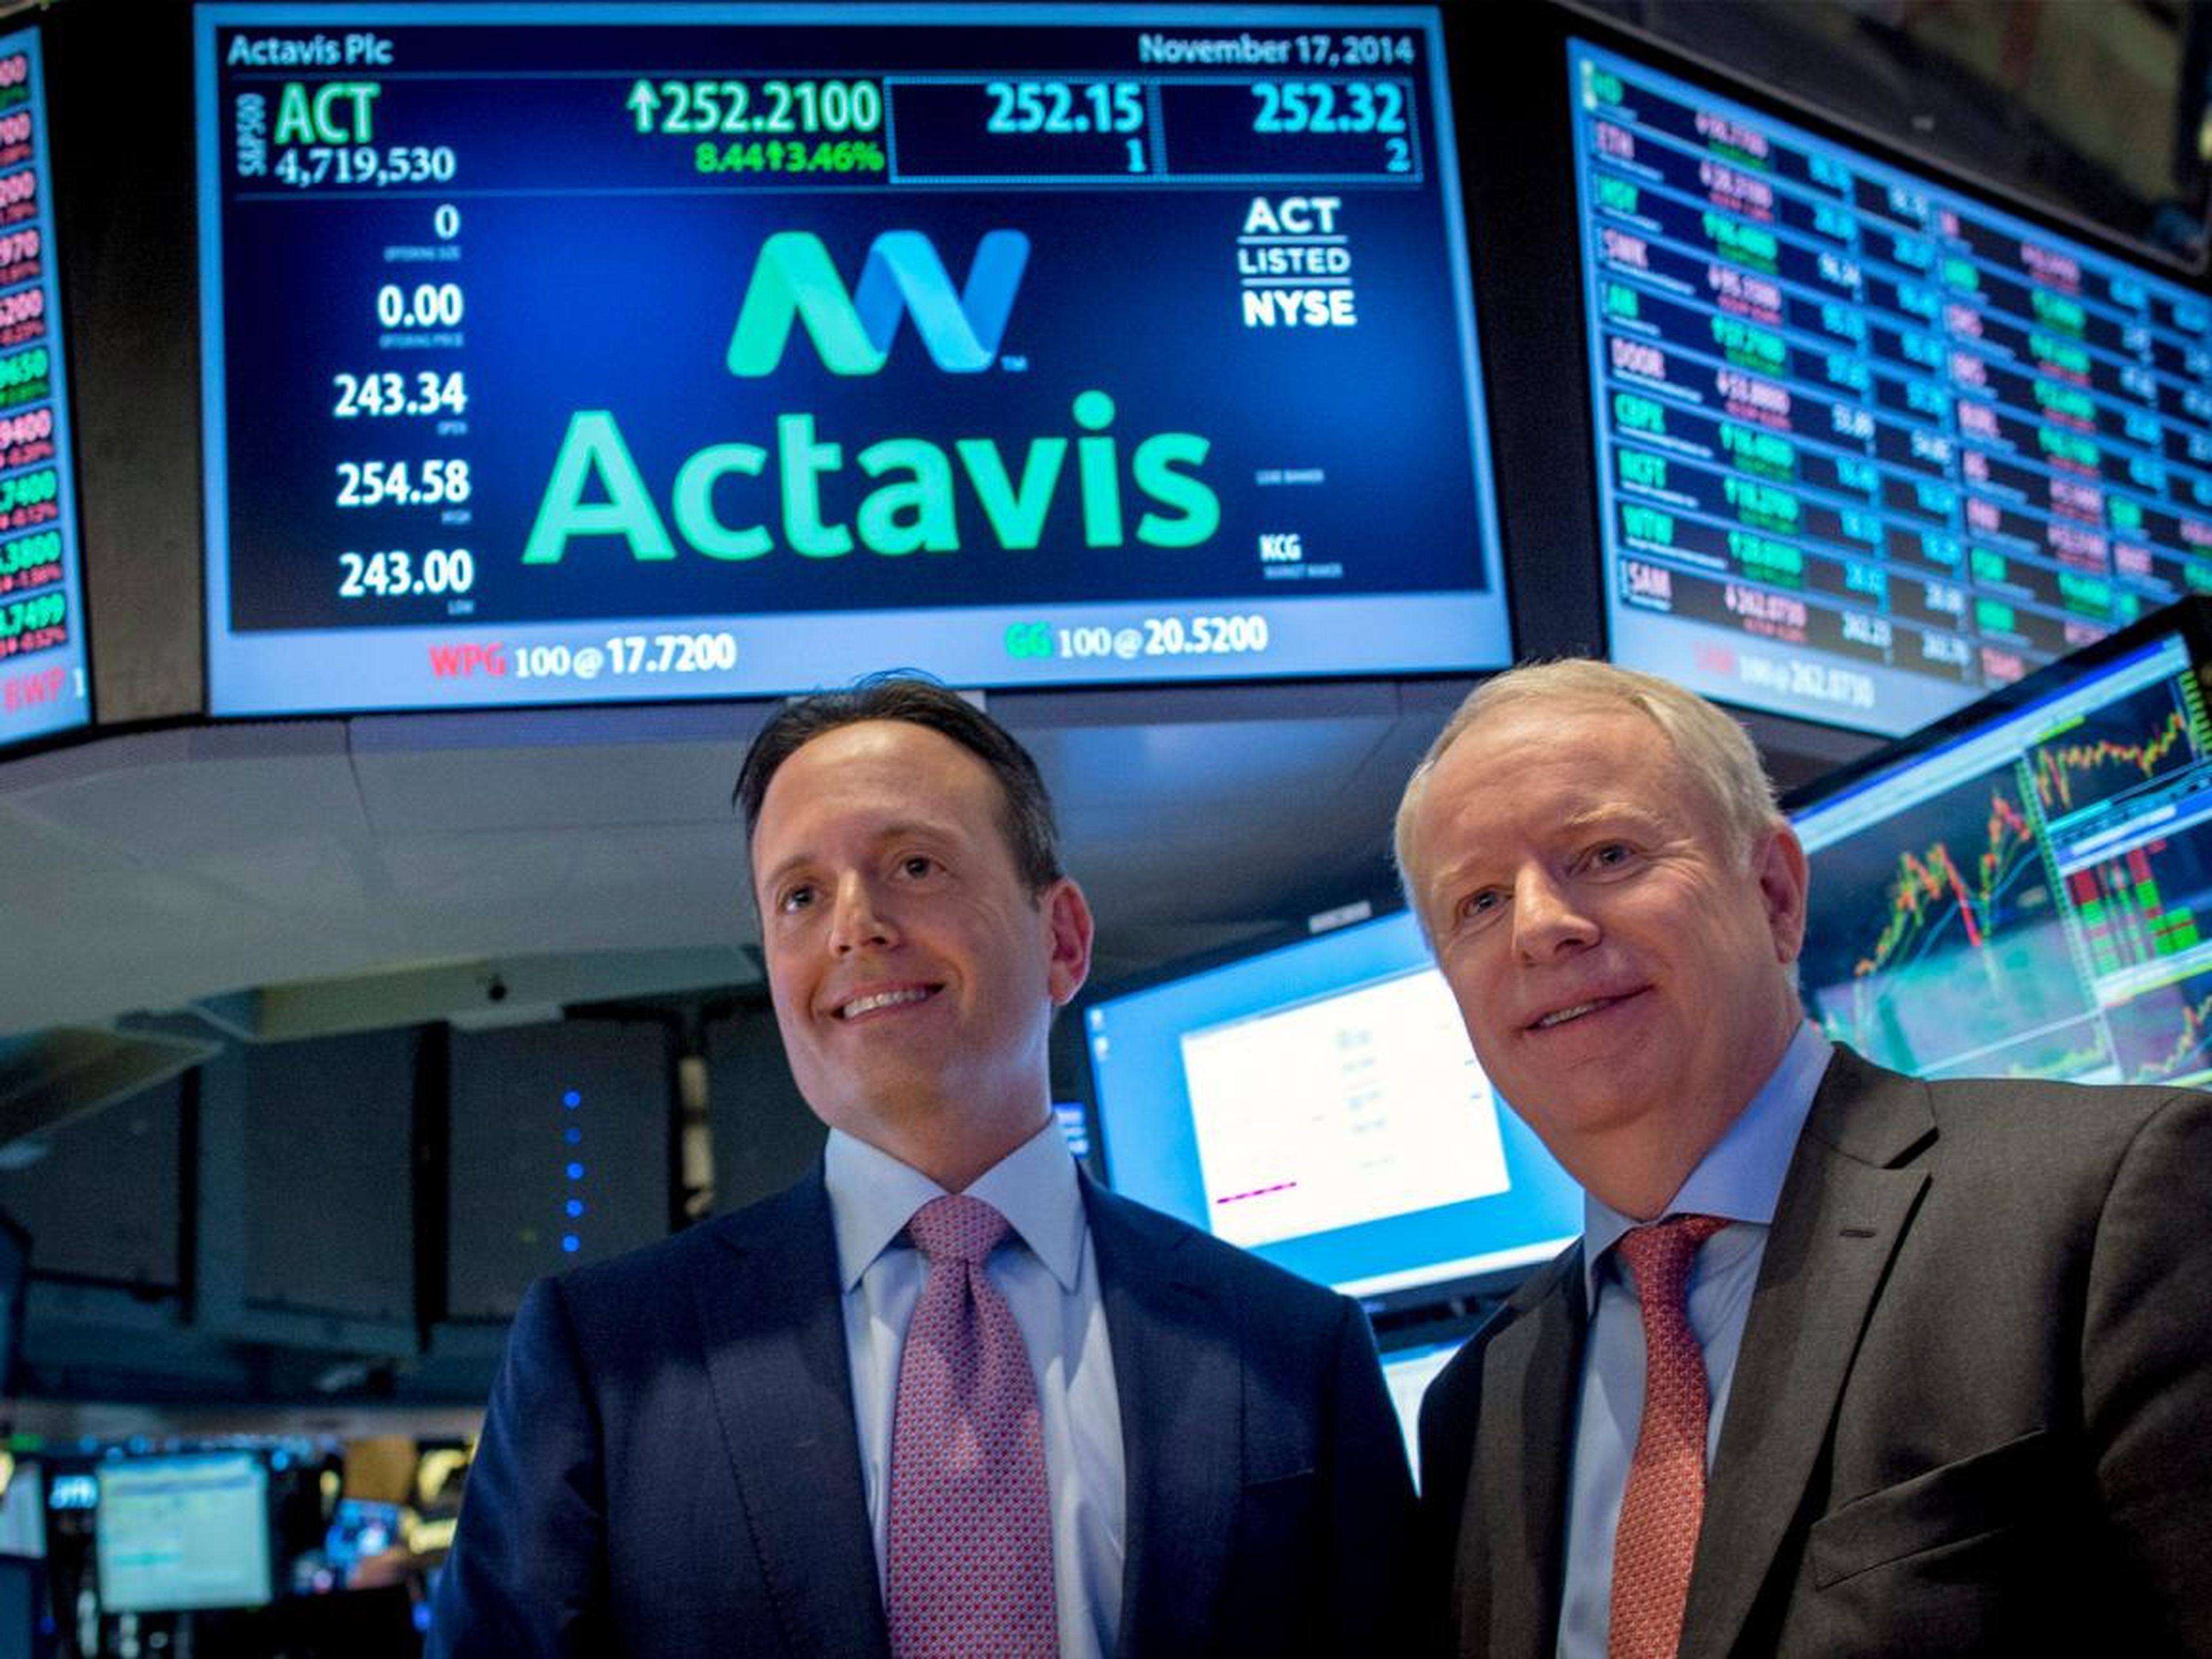 Current Allergan CEO Brent Saunders (left) and former Allergan CEO David Pyott pose together on the floor of the New York Stock Exchange November 17, 2014.